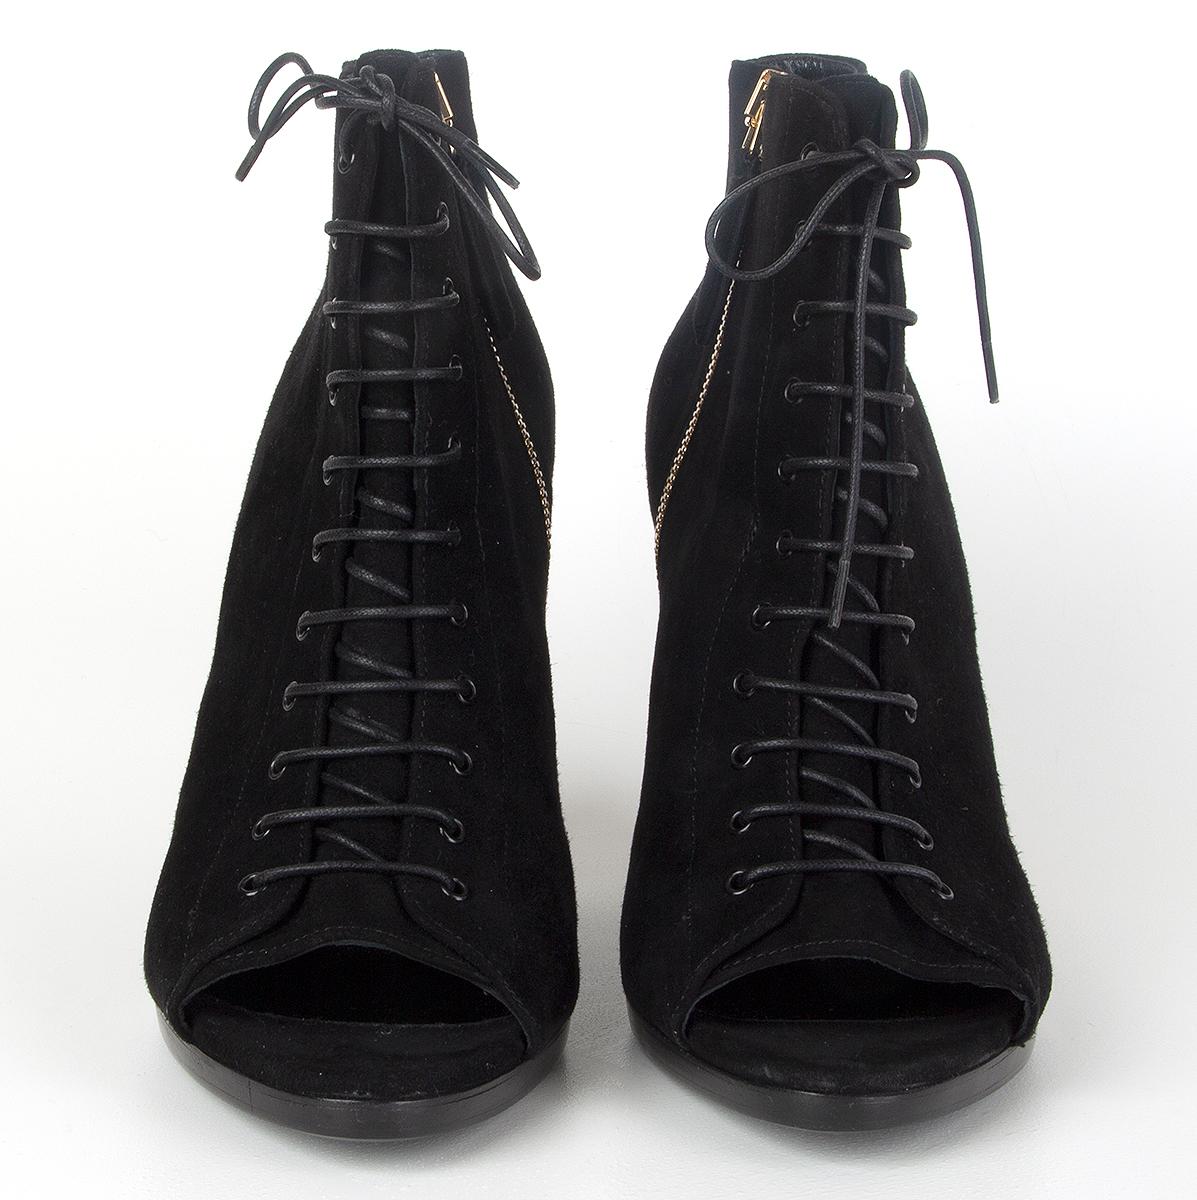 100% authentic Burberry 'Virginia' lace-up booties in black suede with demi wedge heel. Brand new. 

Measurements
Imprinted Size	39
Shoe Size	39
Inside Sole	25cm (9.8in)
Width	7.5cm (2.9in)
Heel	10.5cm (4.1in)
Hardware	Gold-Tone

All our listings